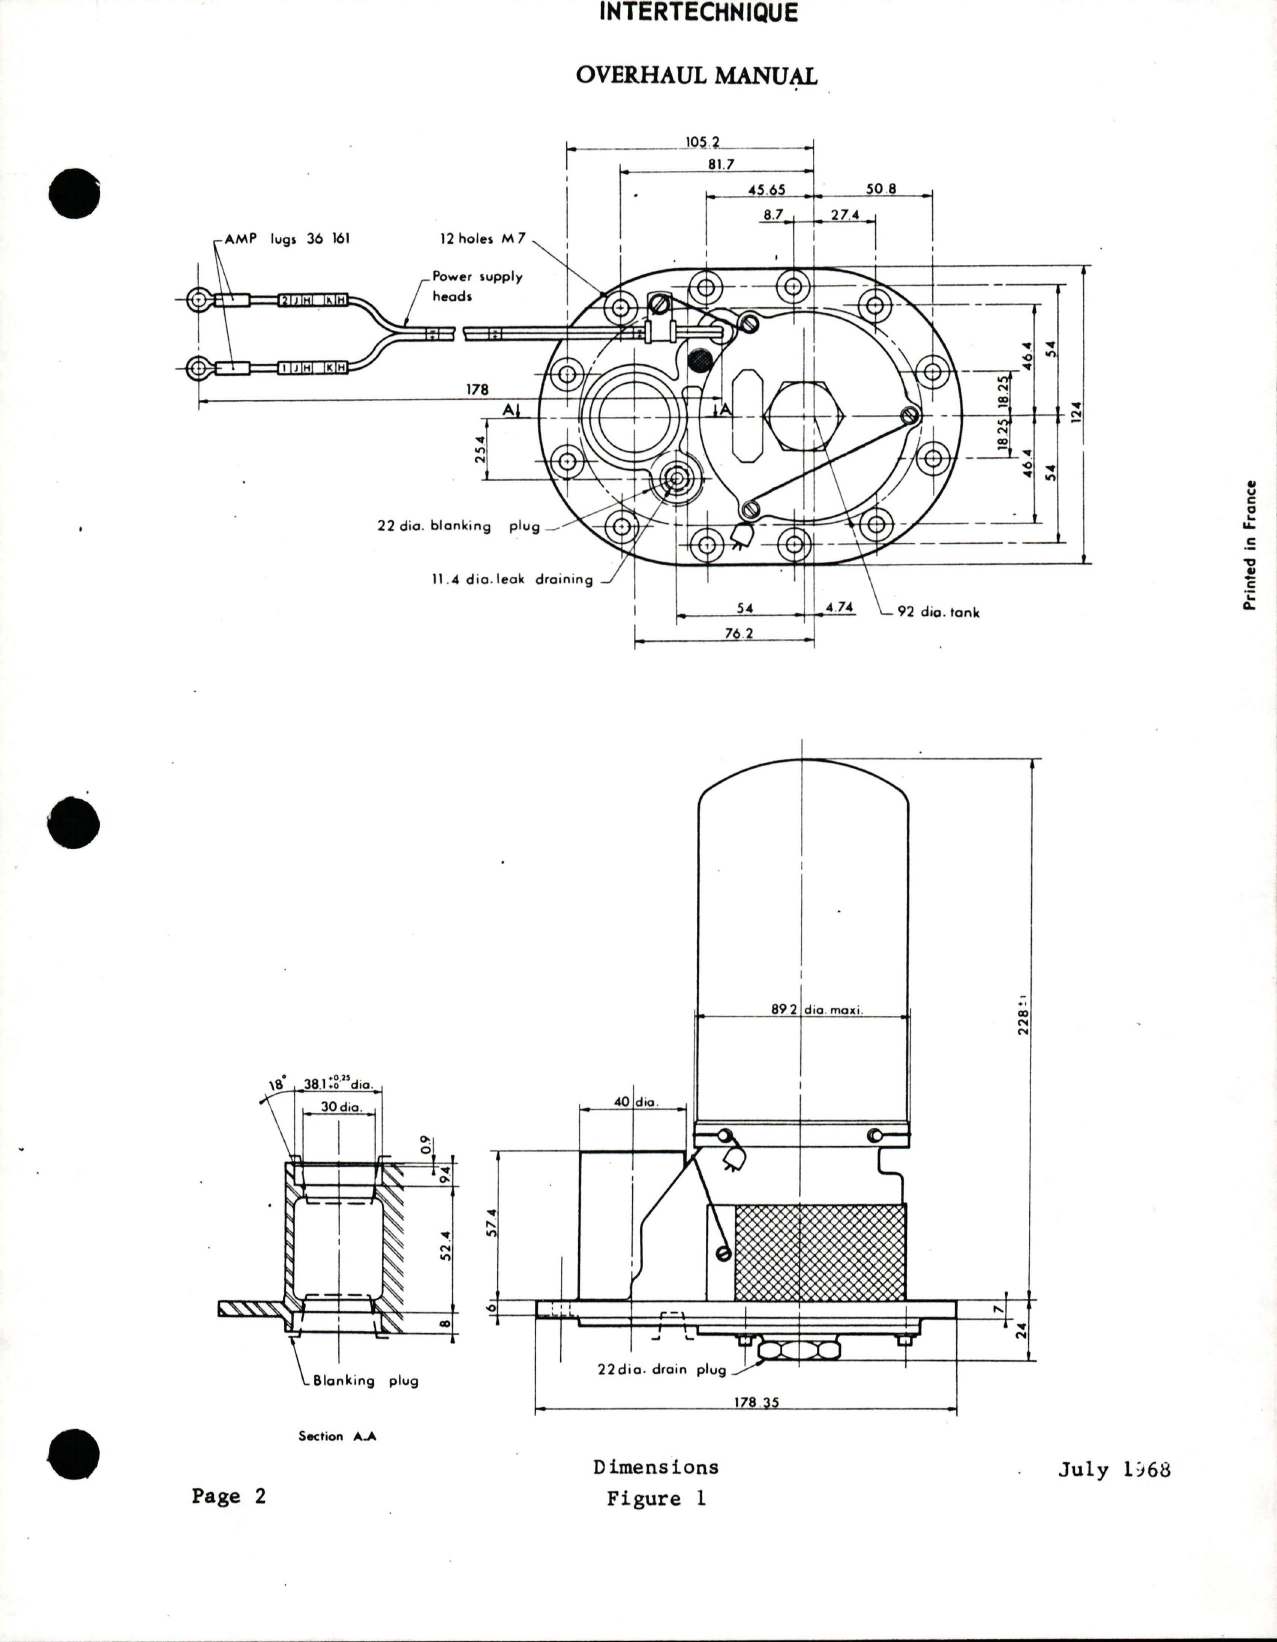 Sample page 7 from AirCorps Library document: Overhaul Manual for Submerged Electrically Driven Fuel Pump - Part 2070-C-01